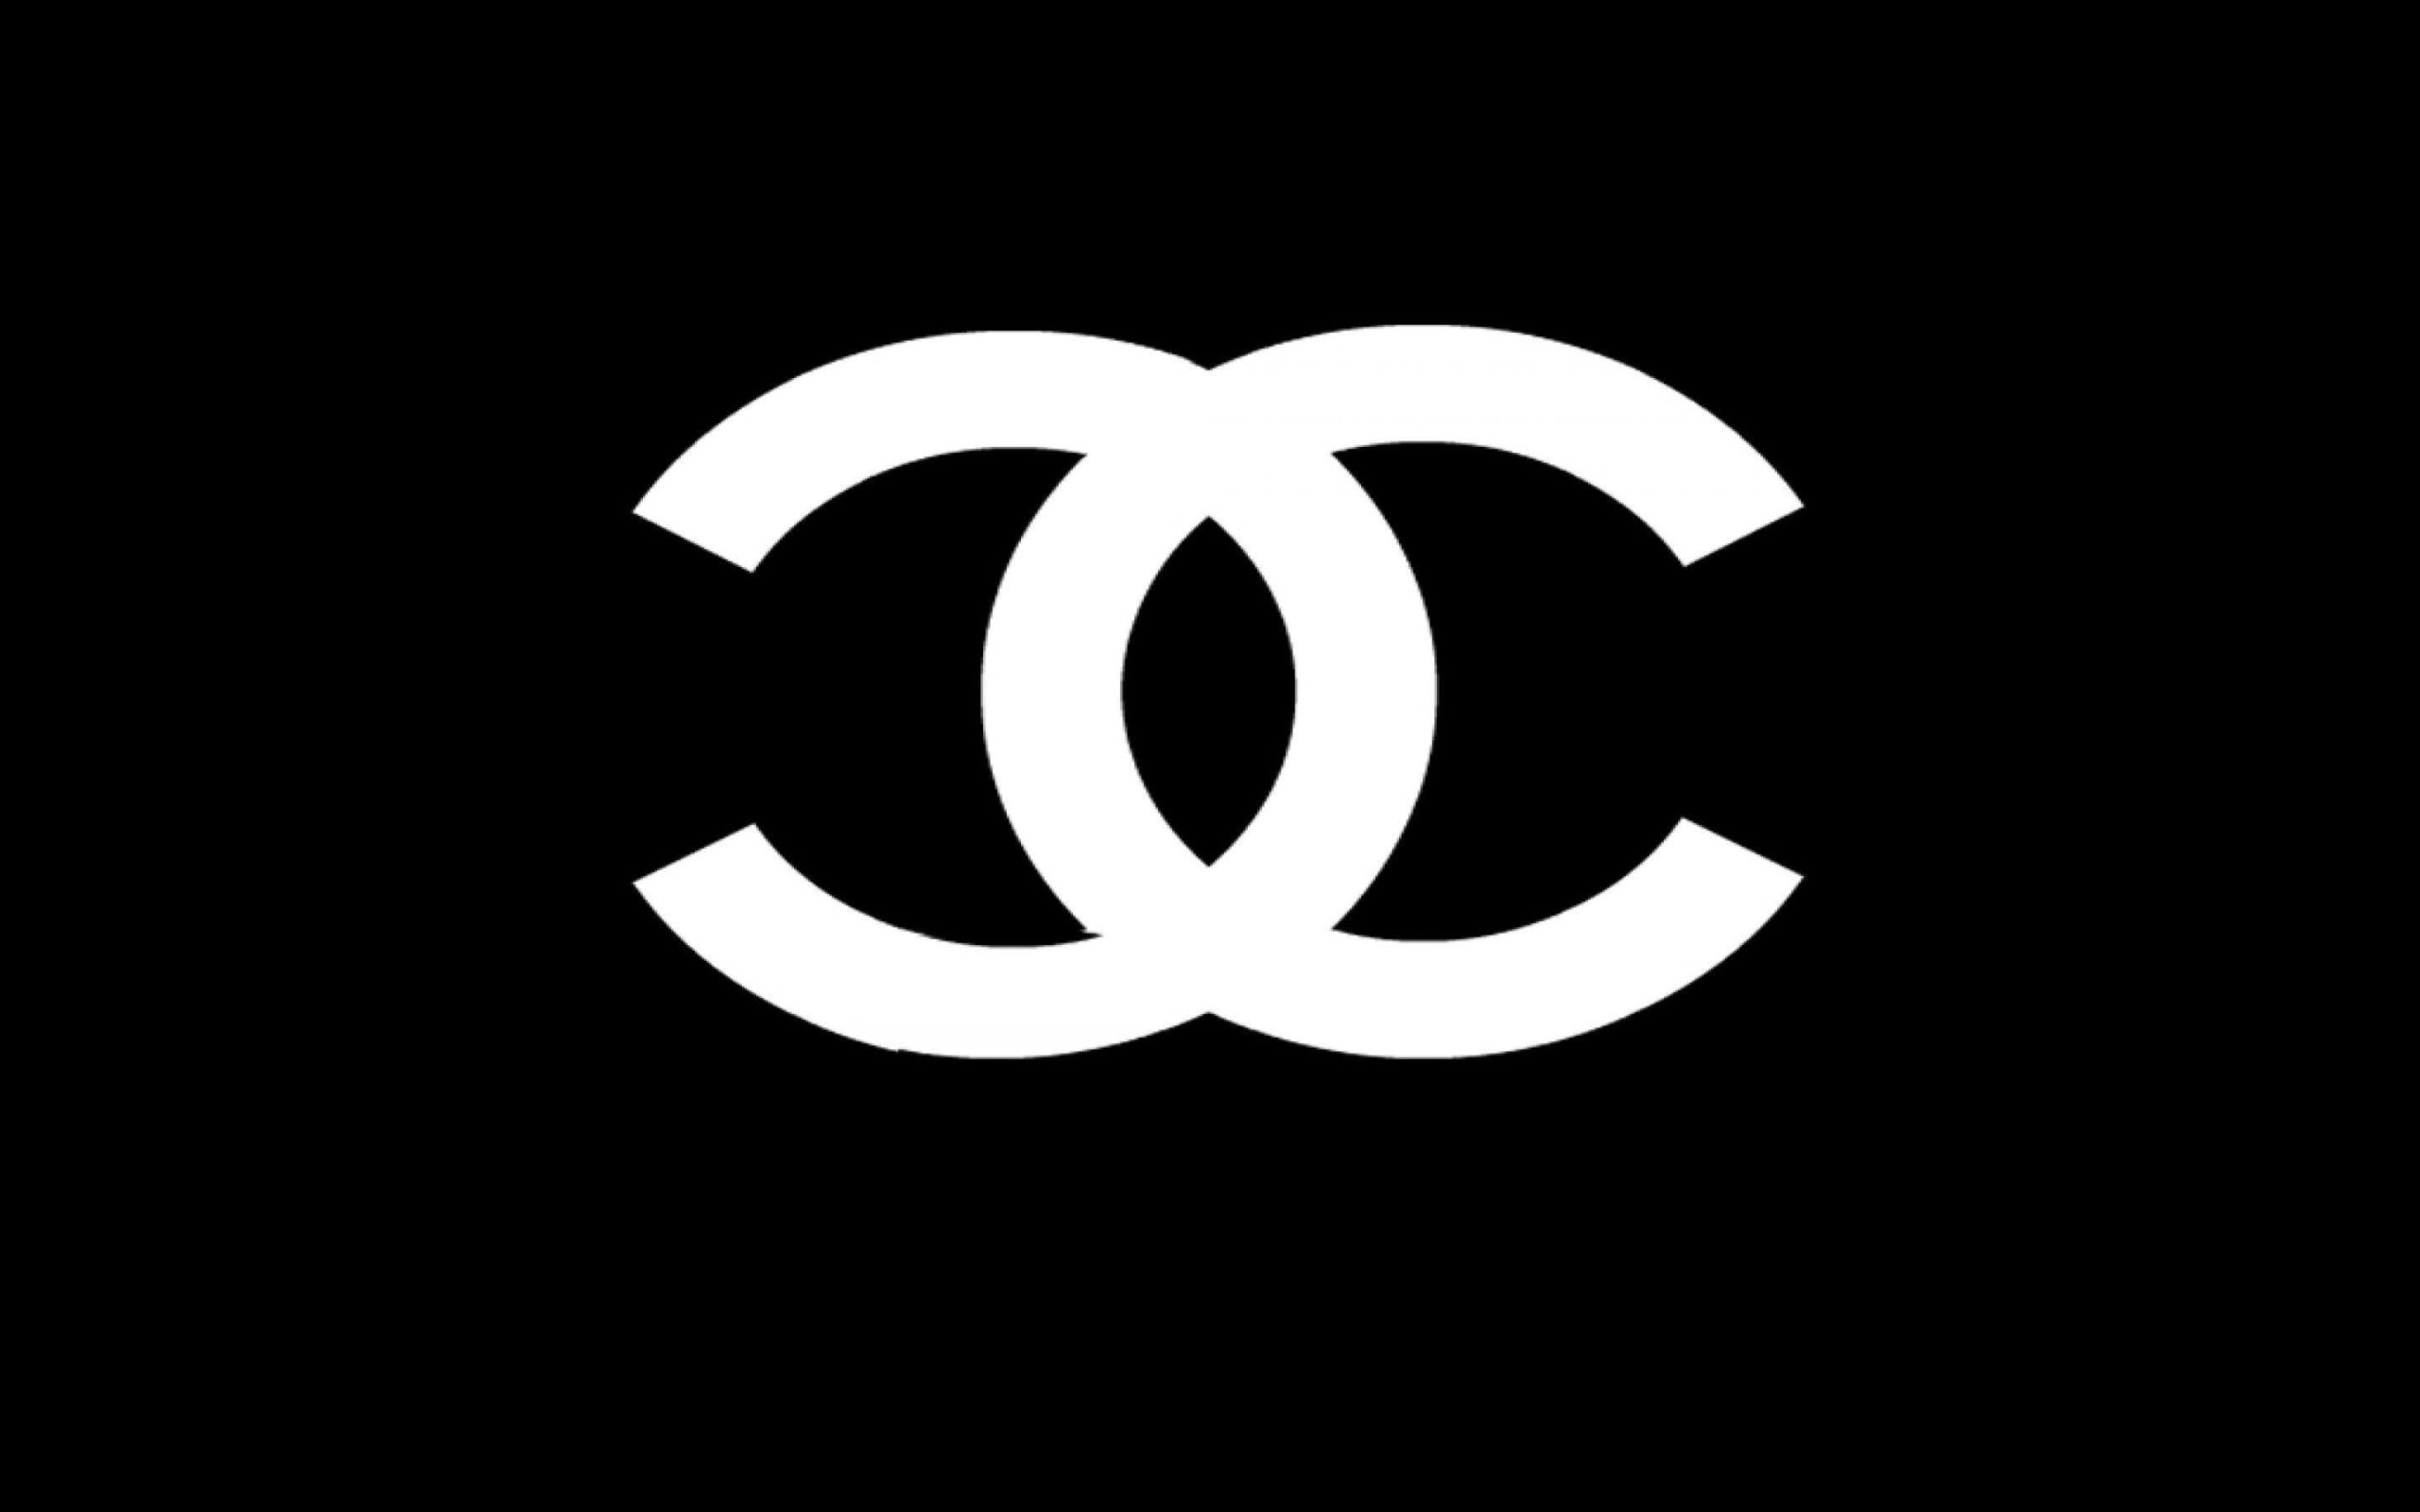 Coco Chanel Wallpaper 4k Download For Laptop, Coco Chanel, Other